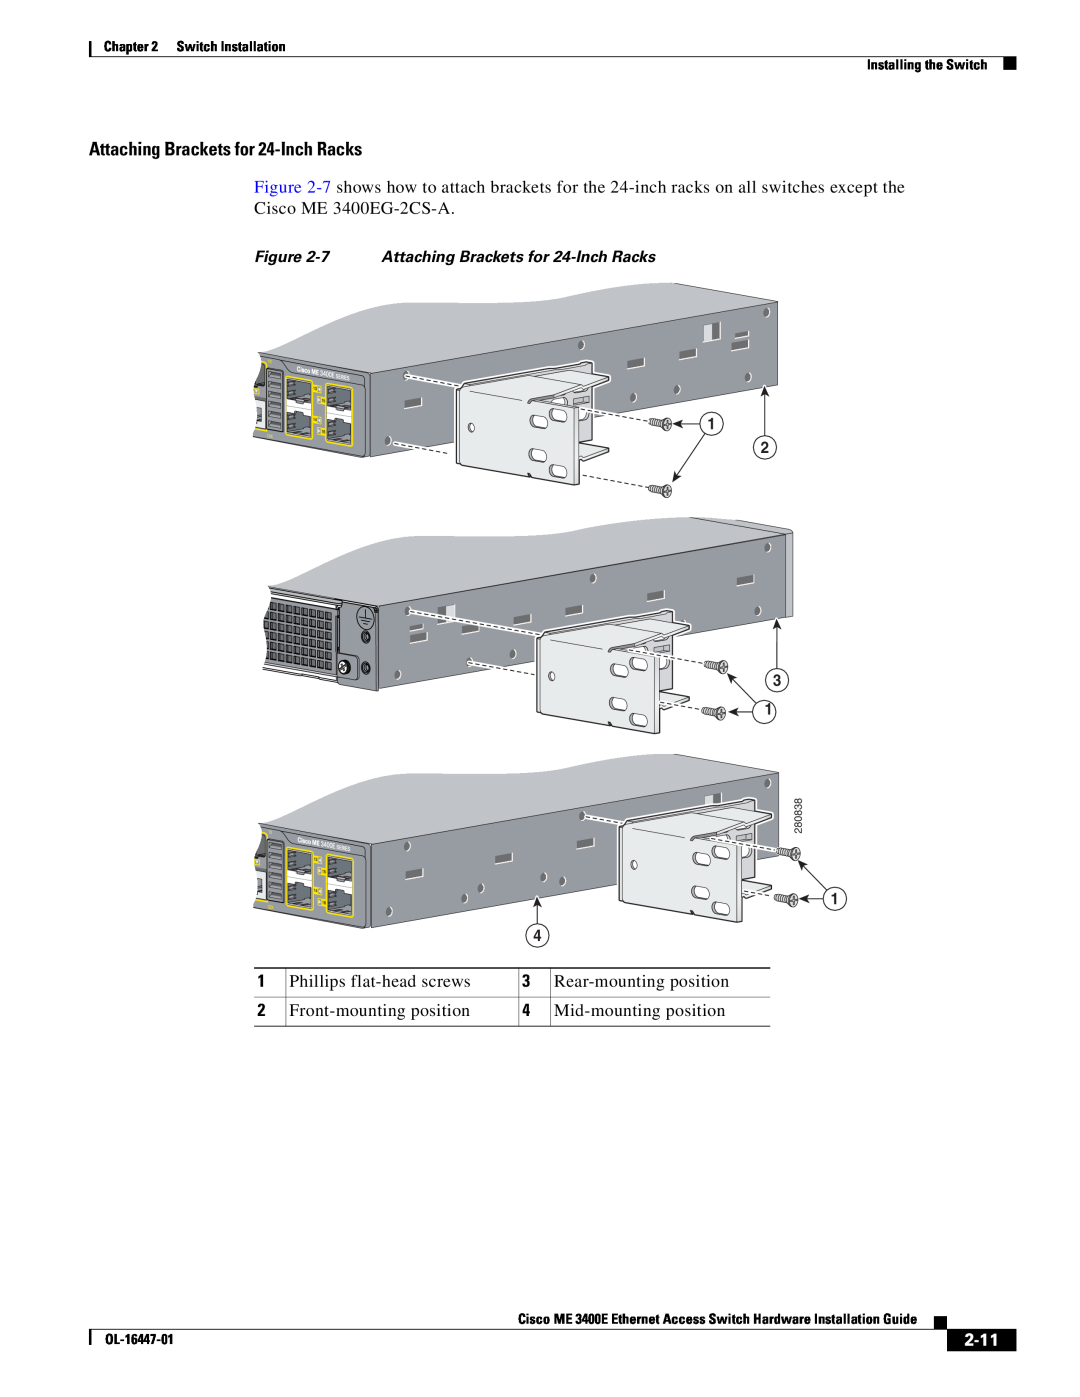 Cisco Systems OL-16447-01 manual 2-11, 7 Attaching Brackets for 24-Inch Racks 